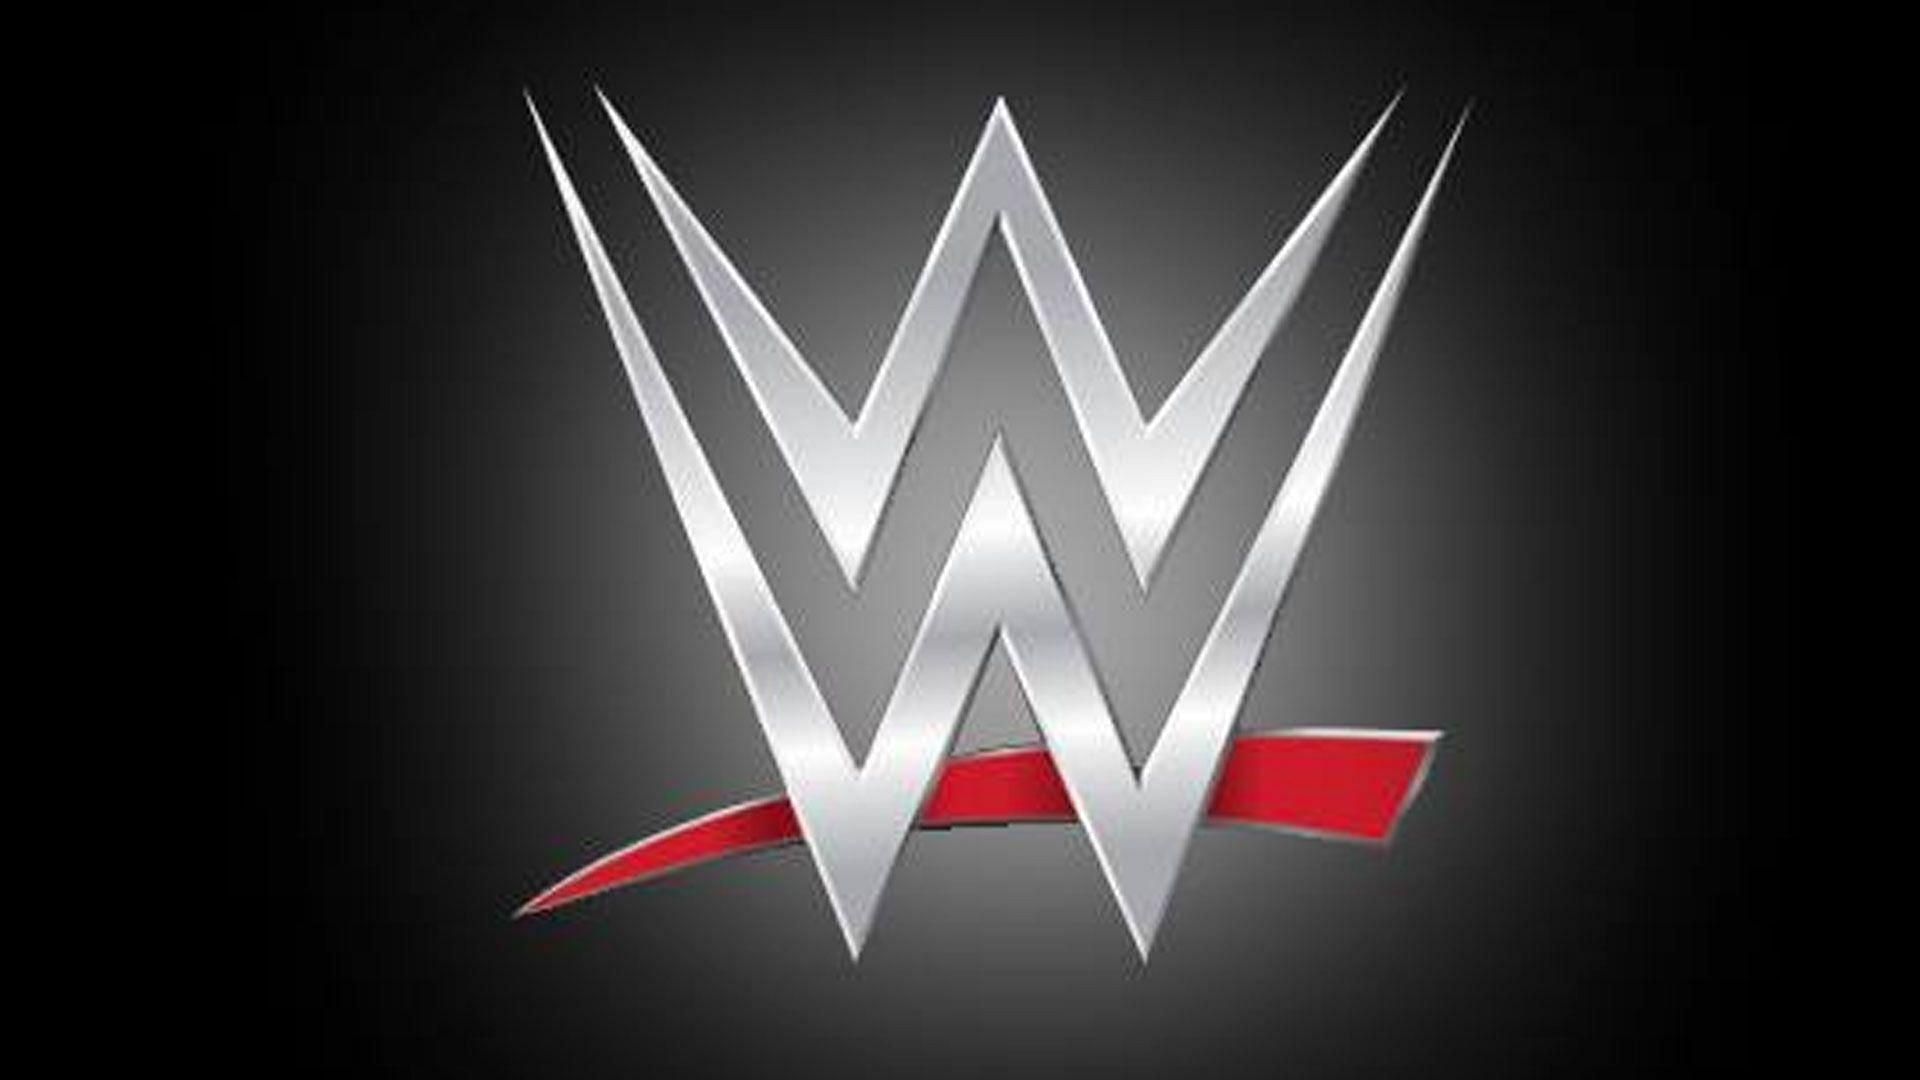 WWE is a wrestling promotion owned by Vince McMahon and his family